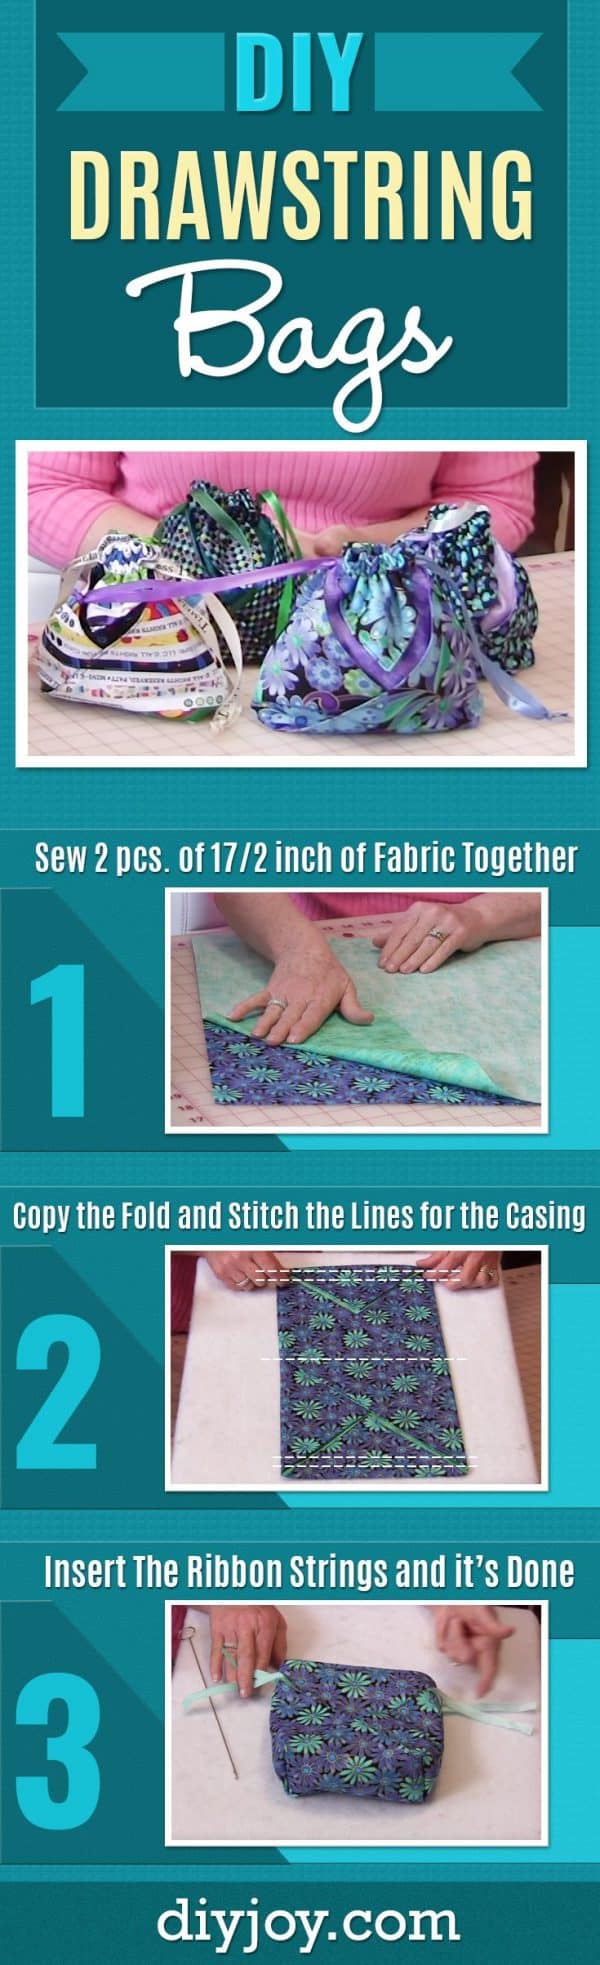 DIY Drawstring Bags - Quick and Easy Sewing Projects for Beginners - How to Sew An Easy Bag - Youtube Tutorial Video - How to Make A Drawstring Bag Step by Step